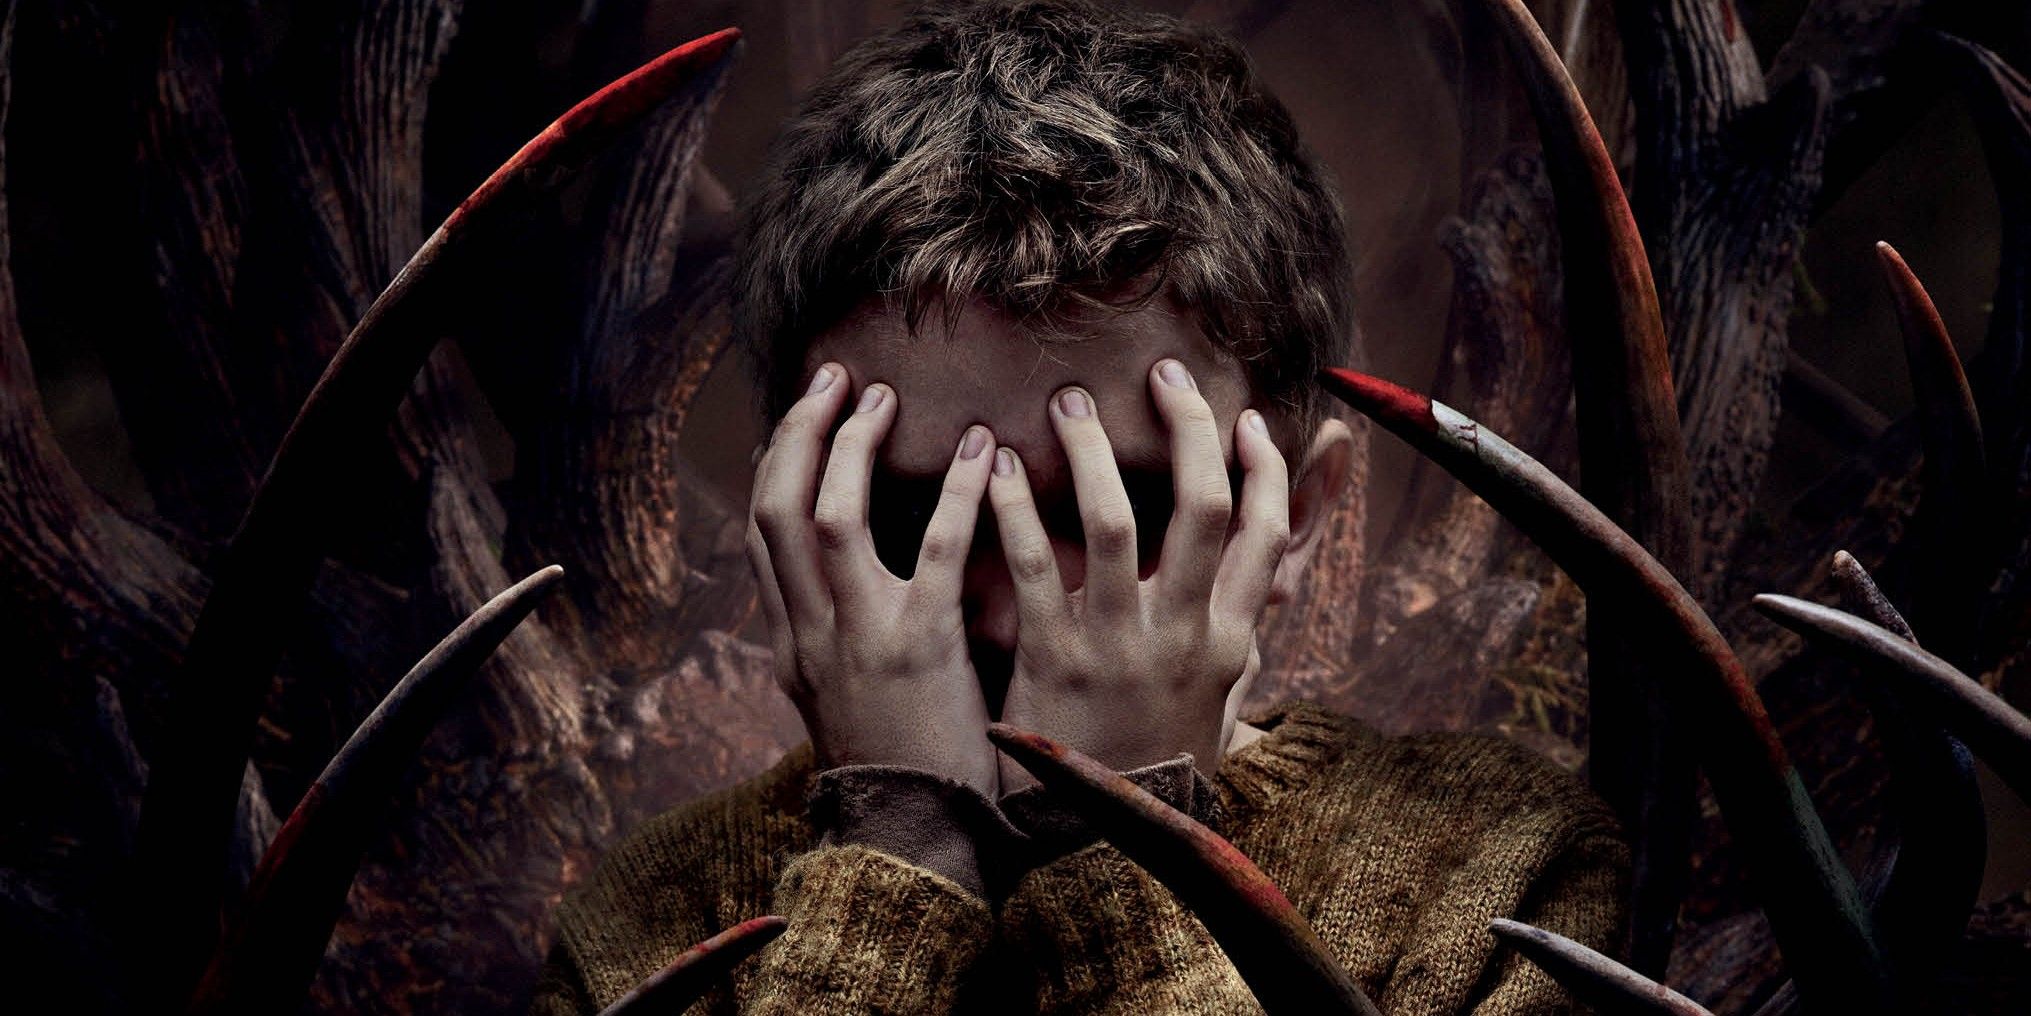 A boy hides his face in his hands in a sea of red-stained antlers